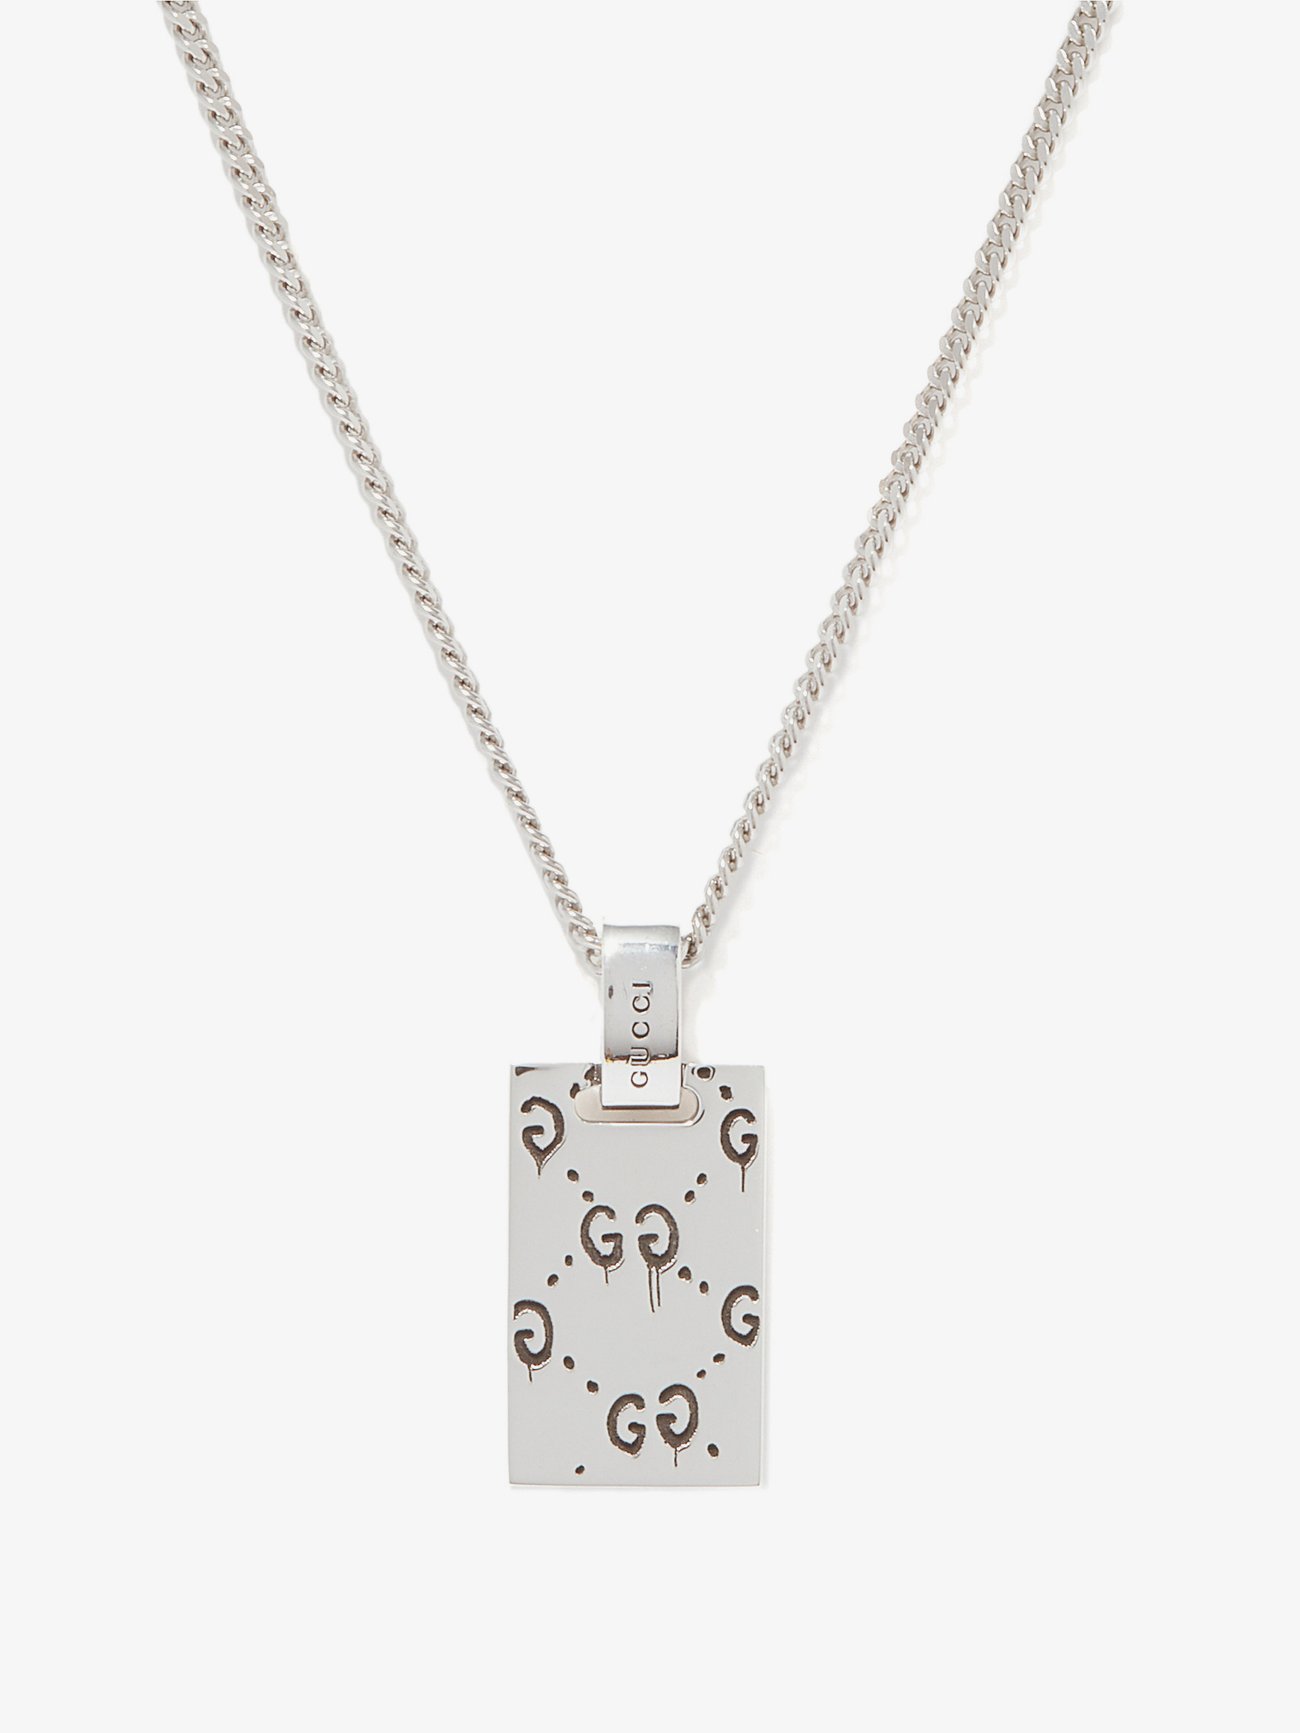 Metallic GucciGhost sterling-silver necklace | Gucci | MATCHESFASHION UK